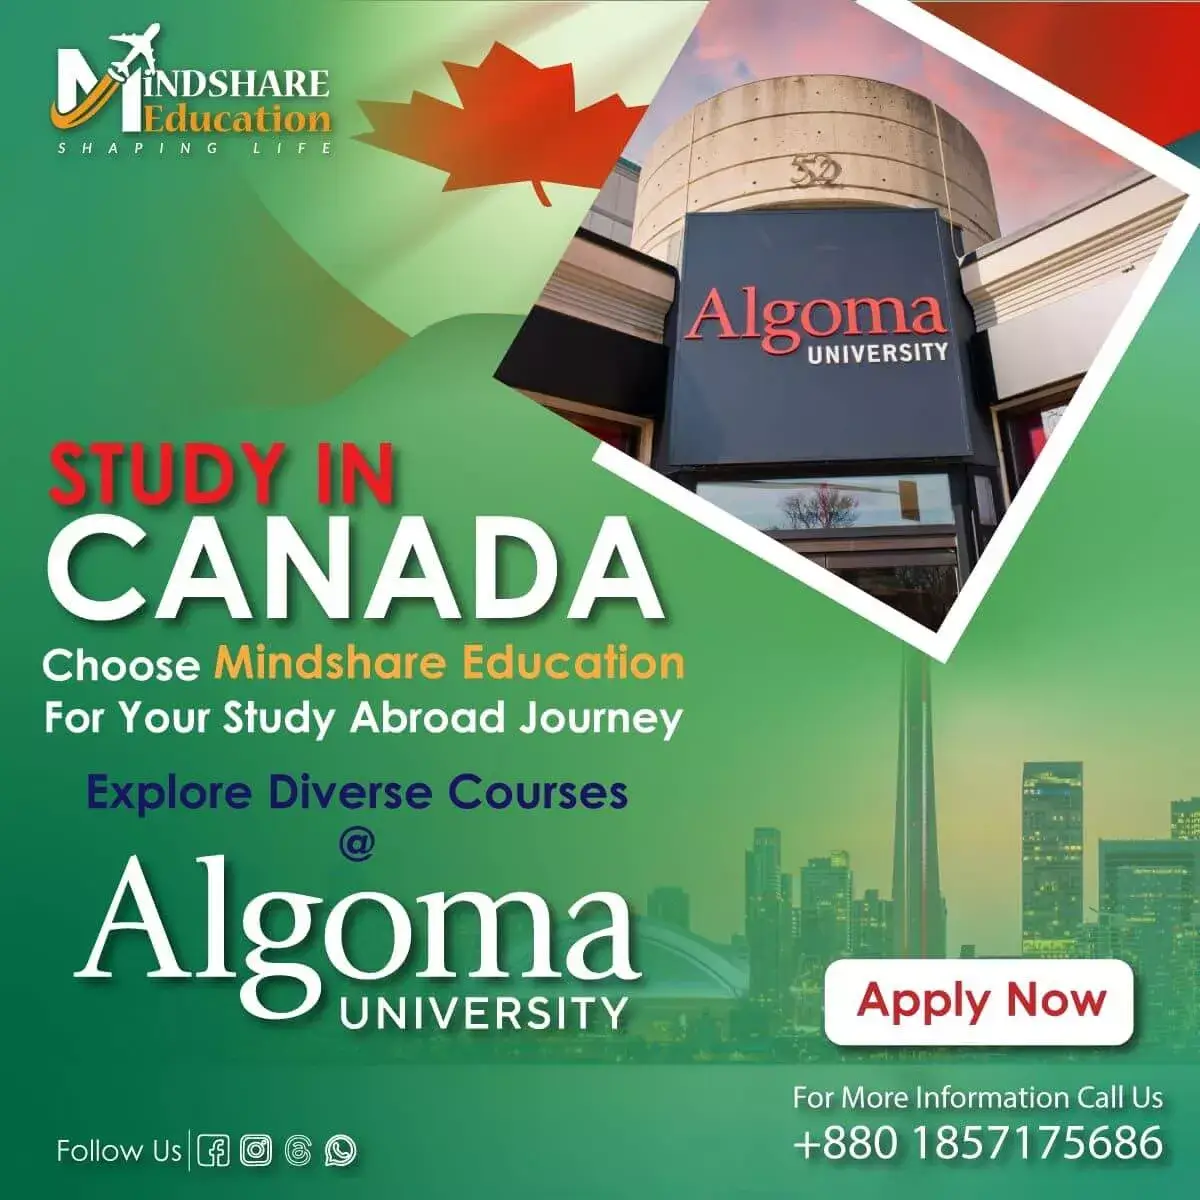 Study in Canada By MindShare Education1